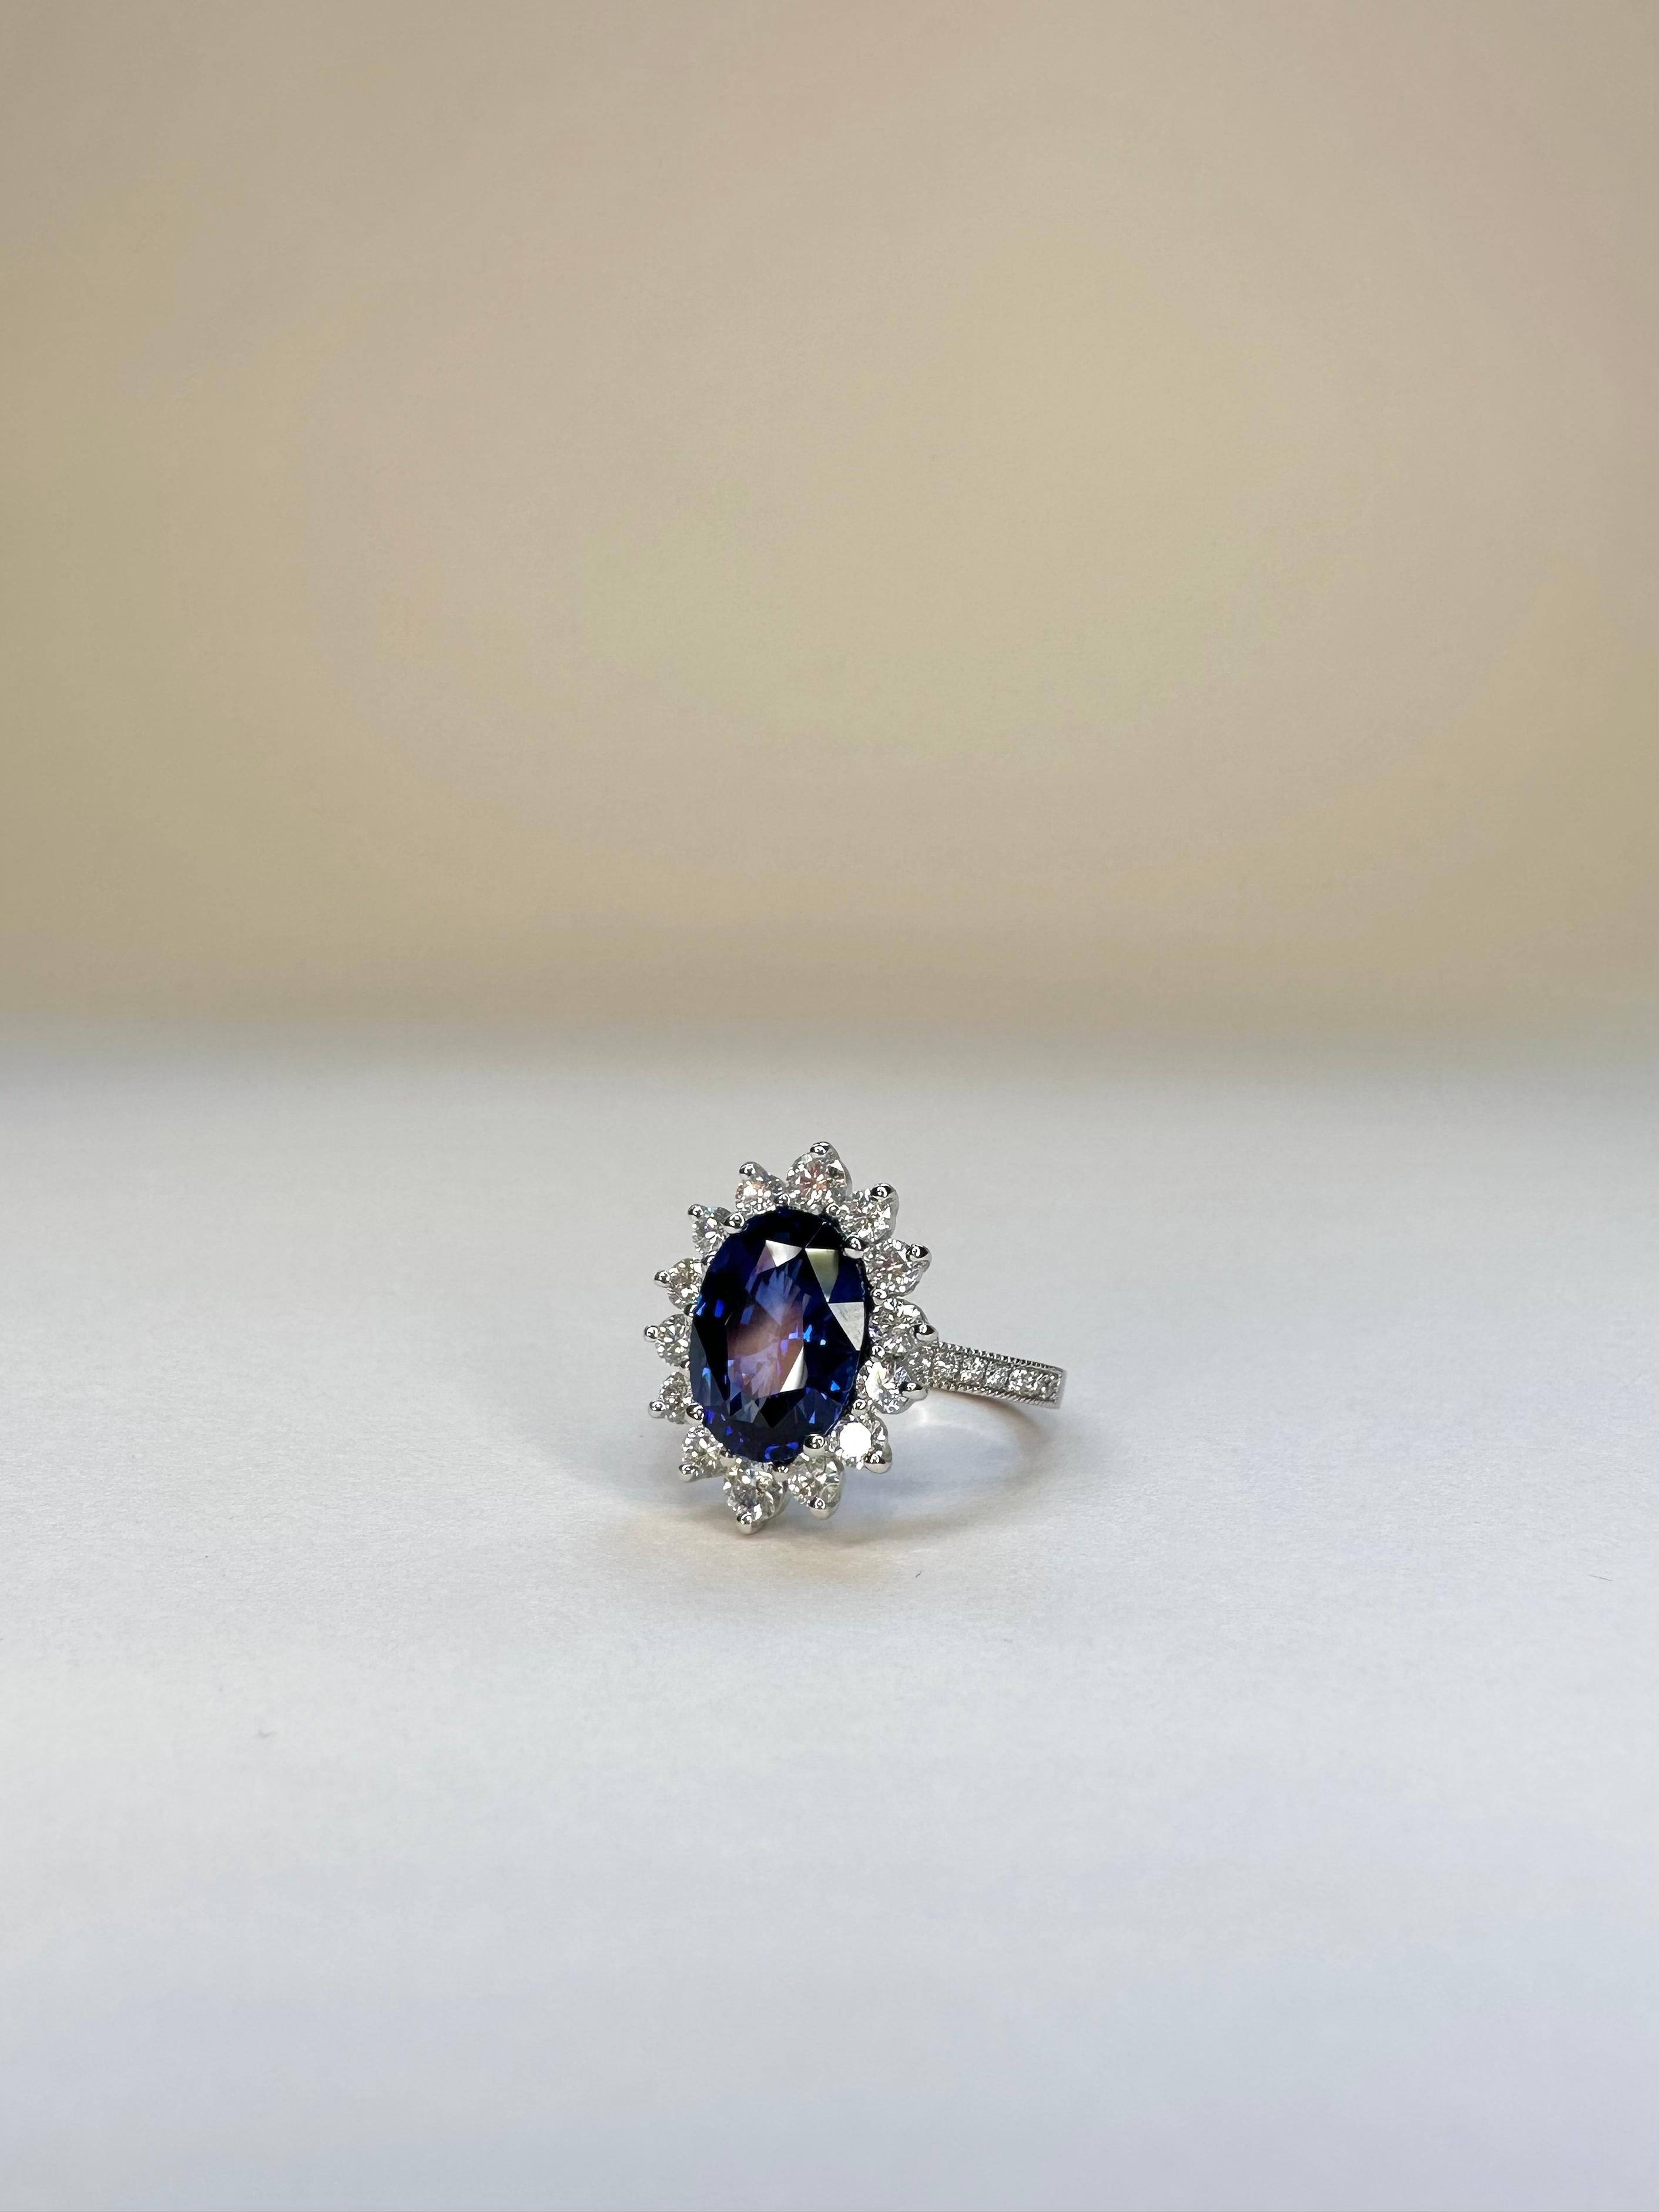 For Sale:  18k White Gold 3.99 Carat Royal Blue Oval Sapphire Ring With 1 Cts of Diamonds 5